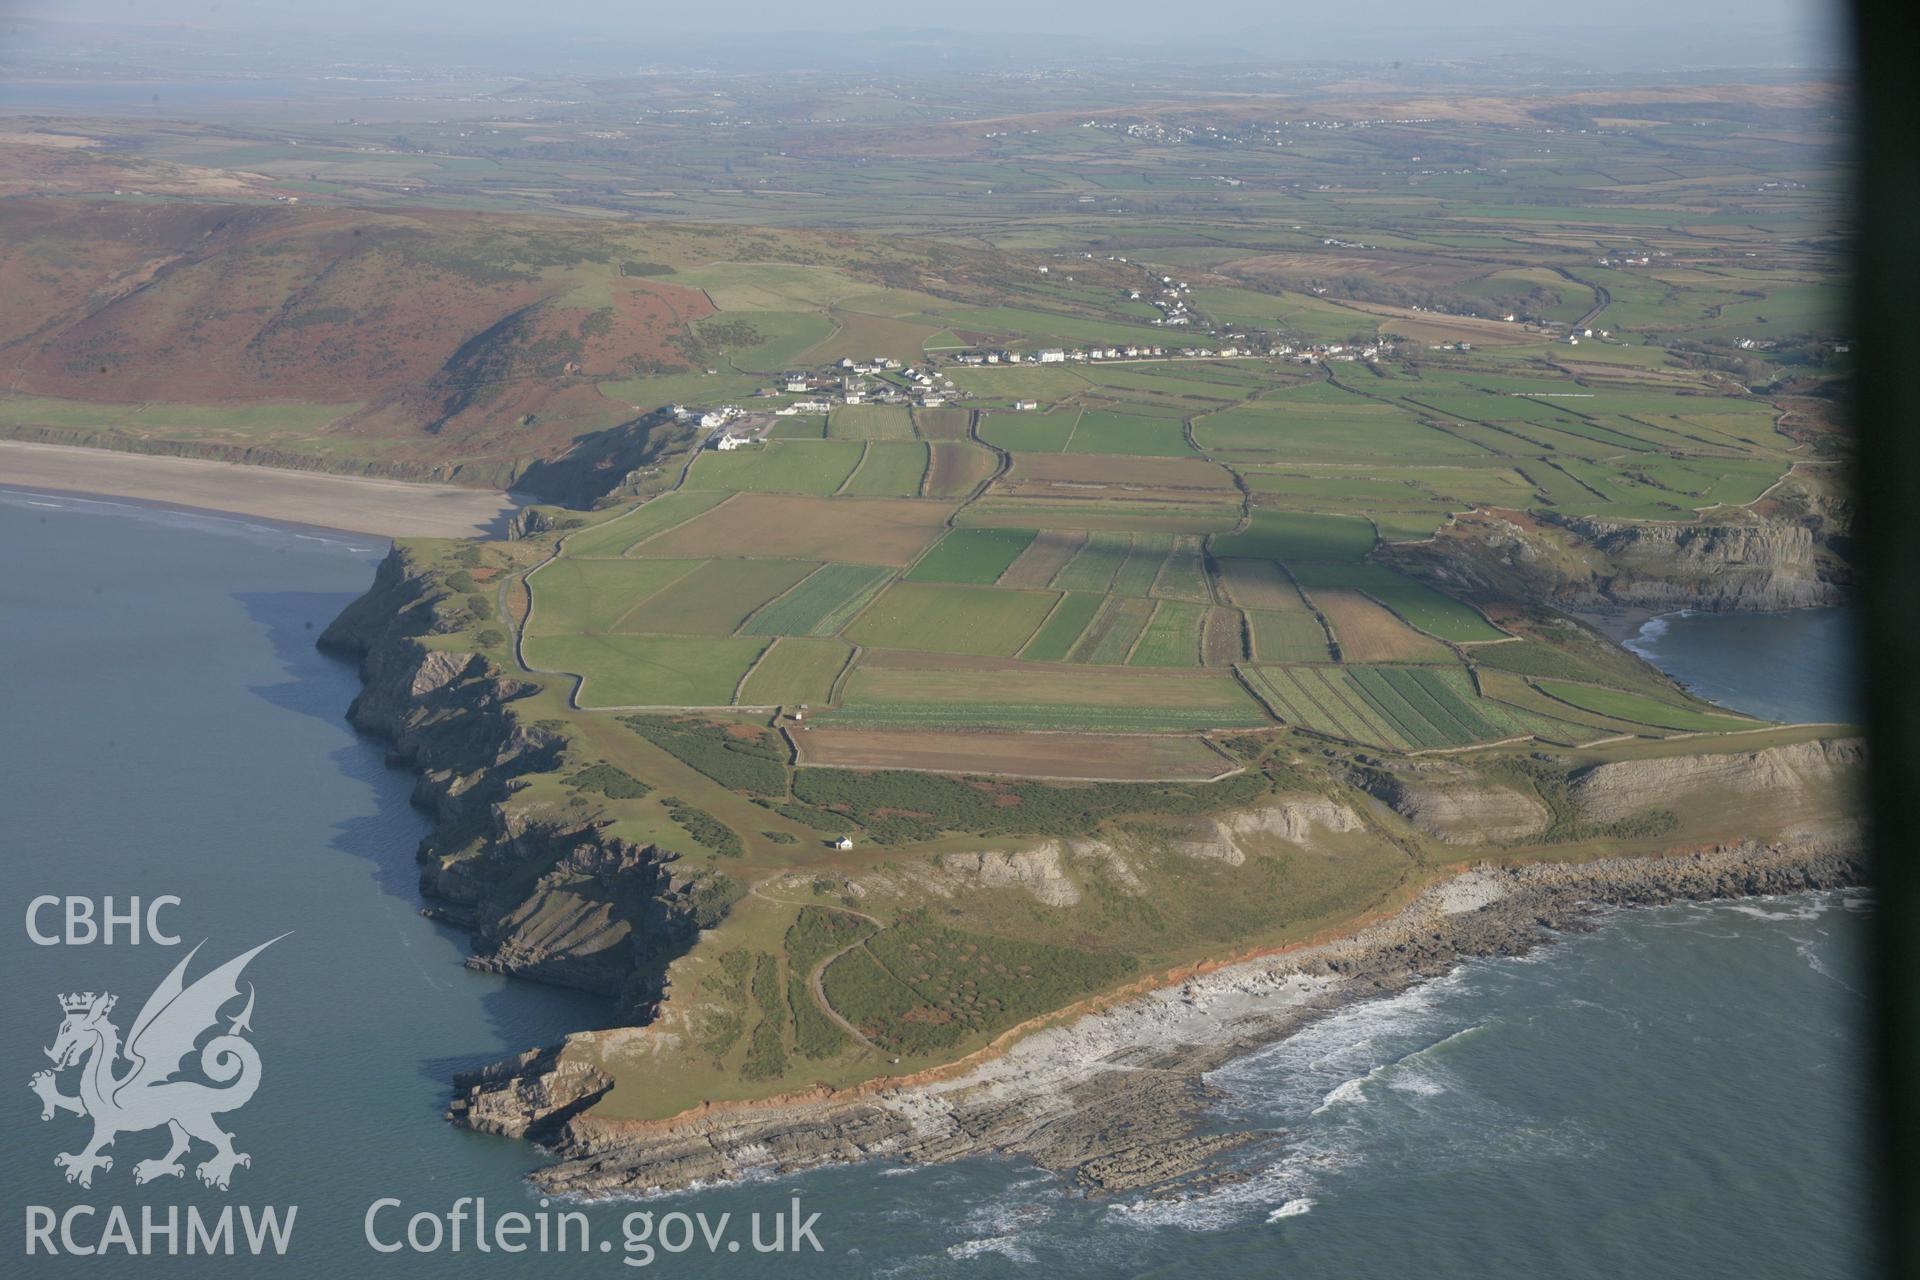 RCAHMW colour oblique aerial photograph of Rhossili Field System (The Vile) from the west. Taken on 26 January 2006 by Toby Driver.